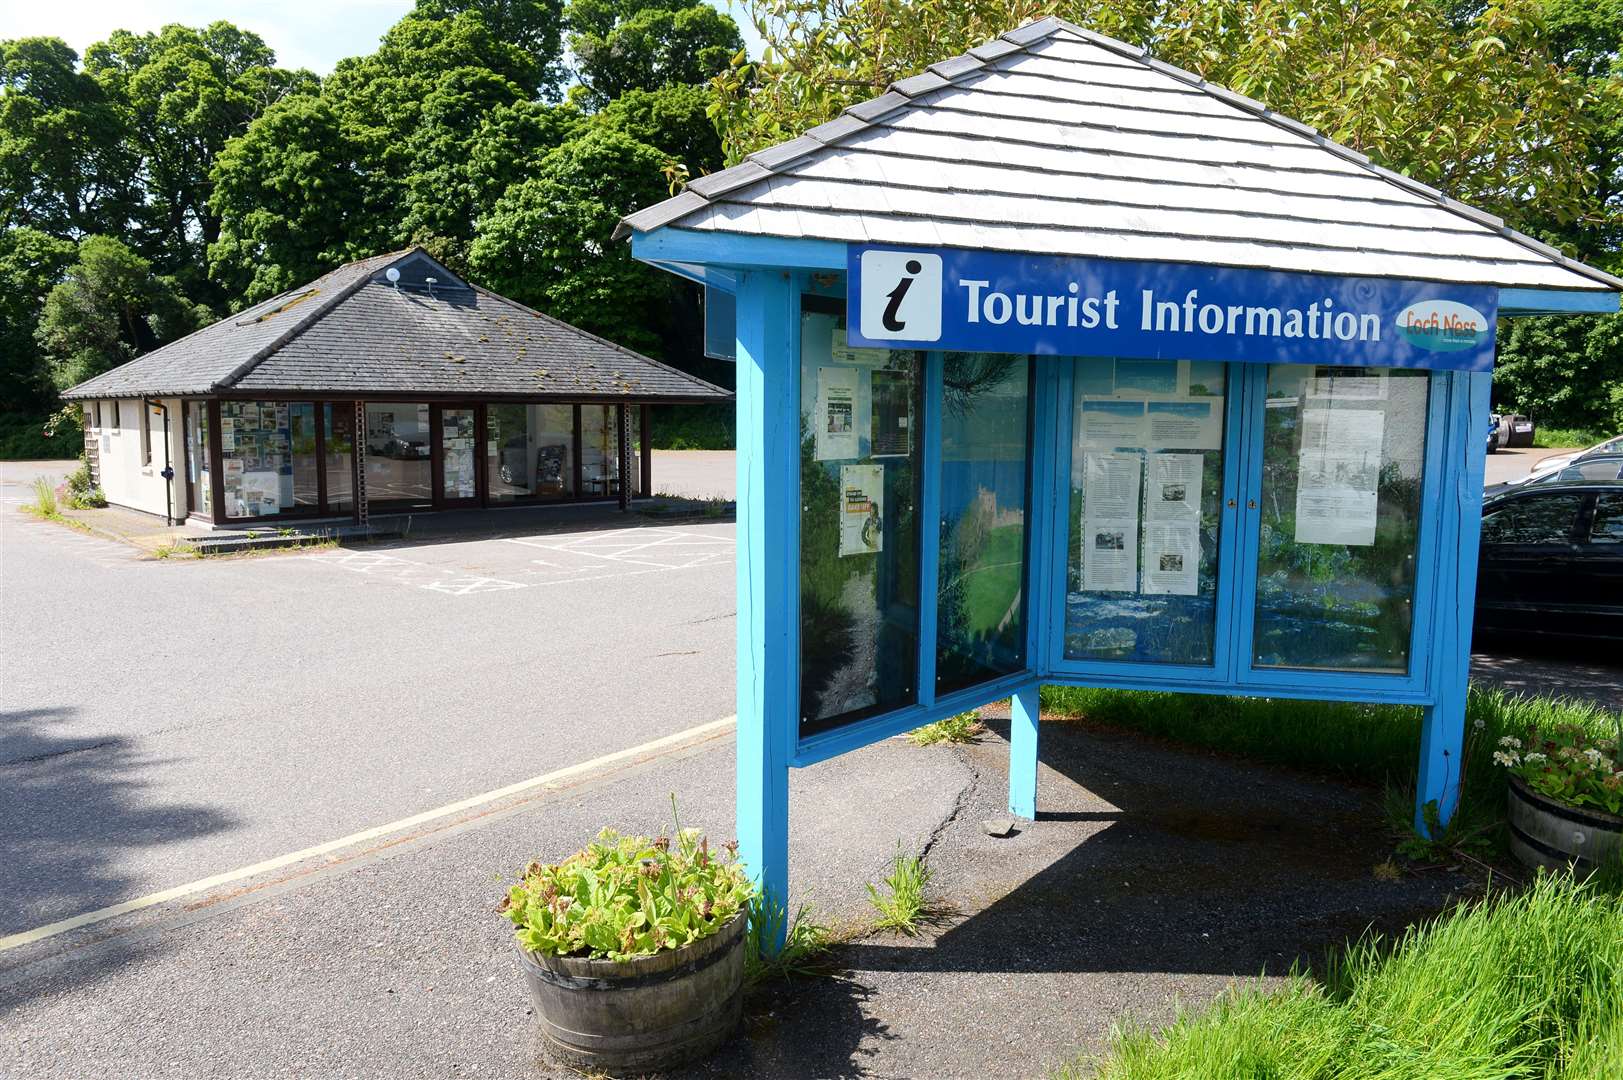 The community-led venture acquired and refurbished the visitor information centre and public toilets in the village car park in Drumnadrochit.